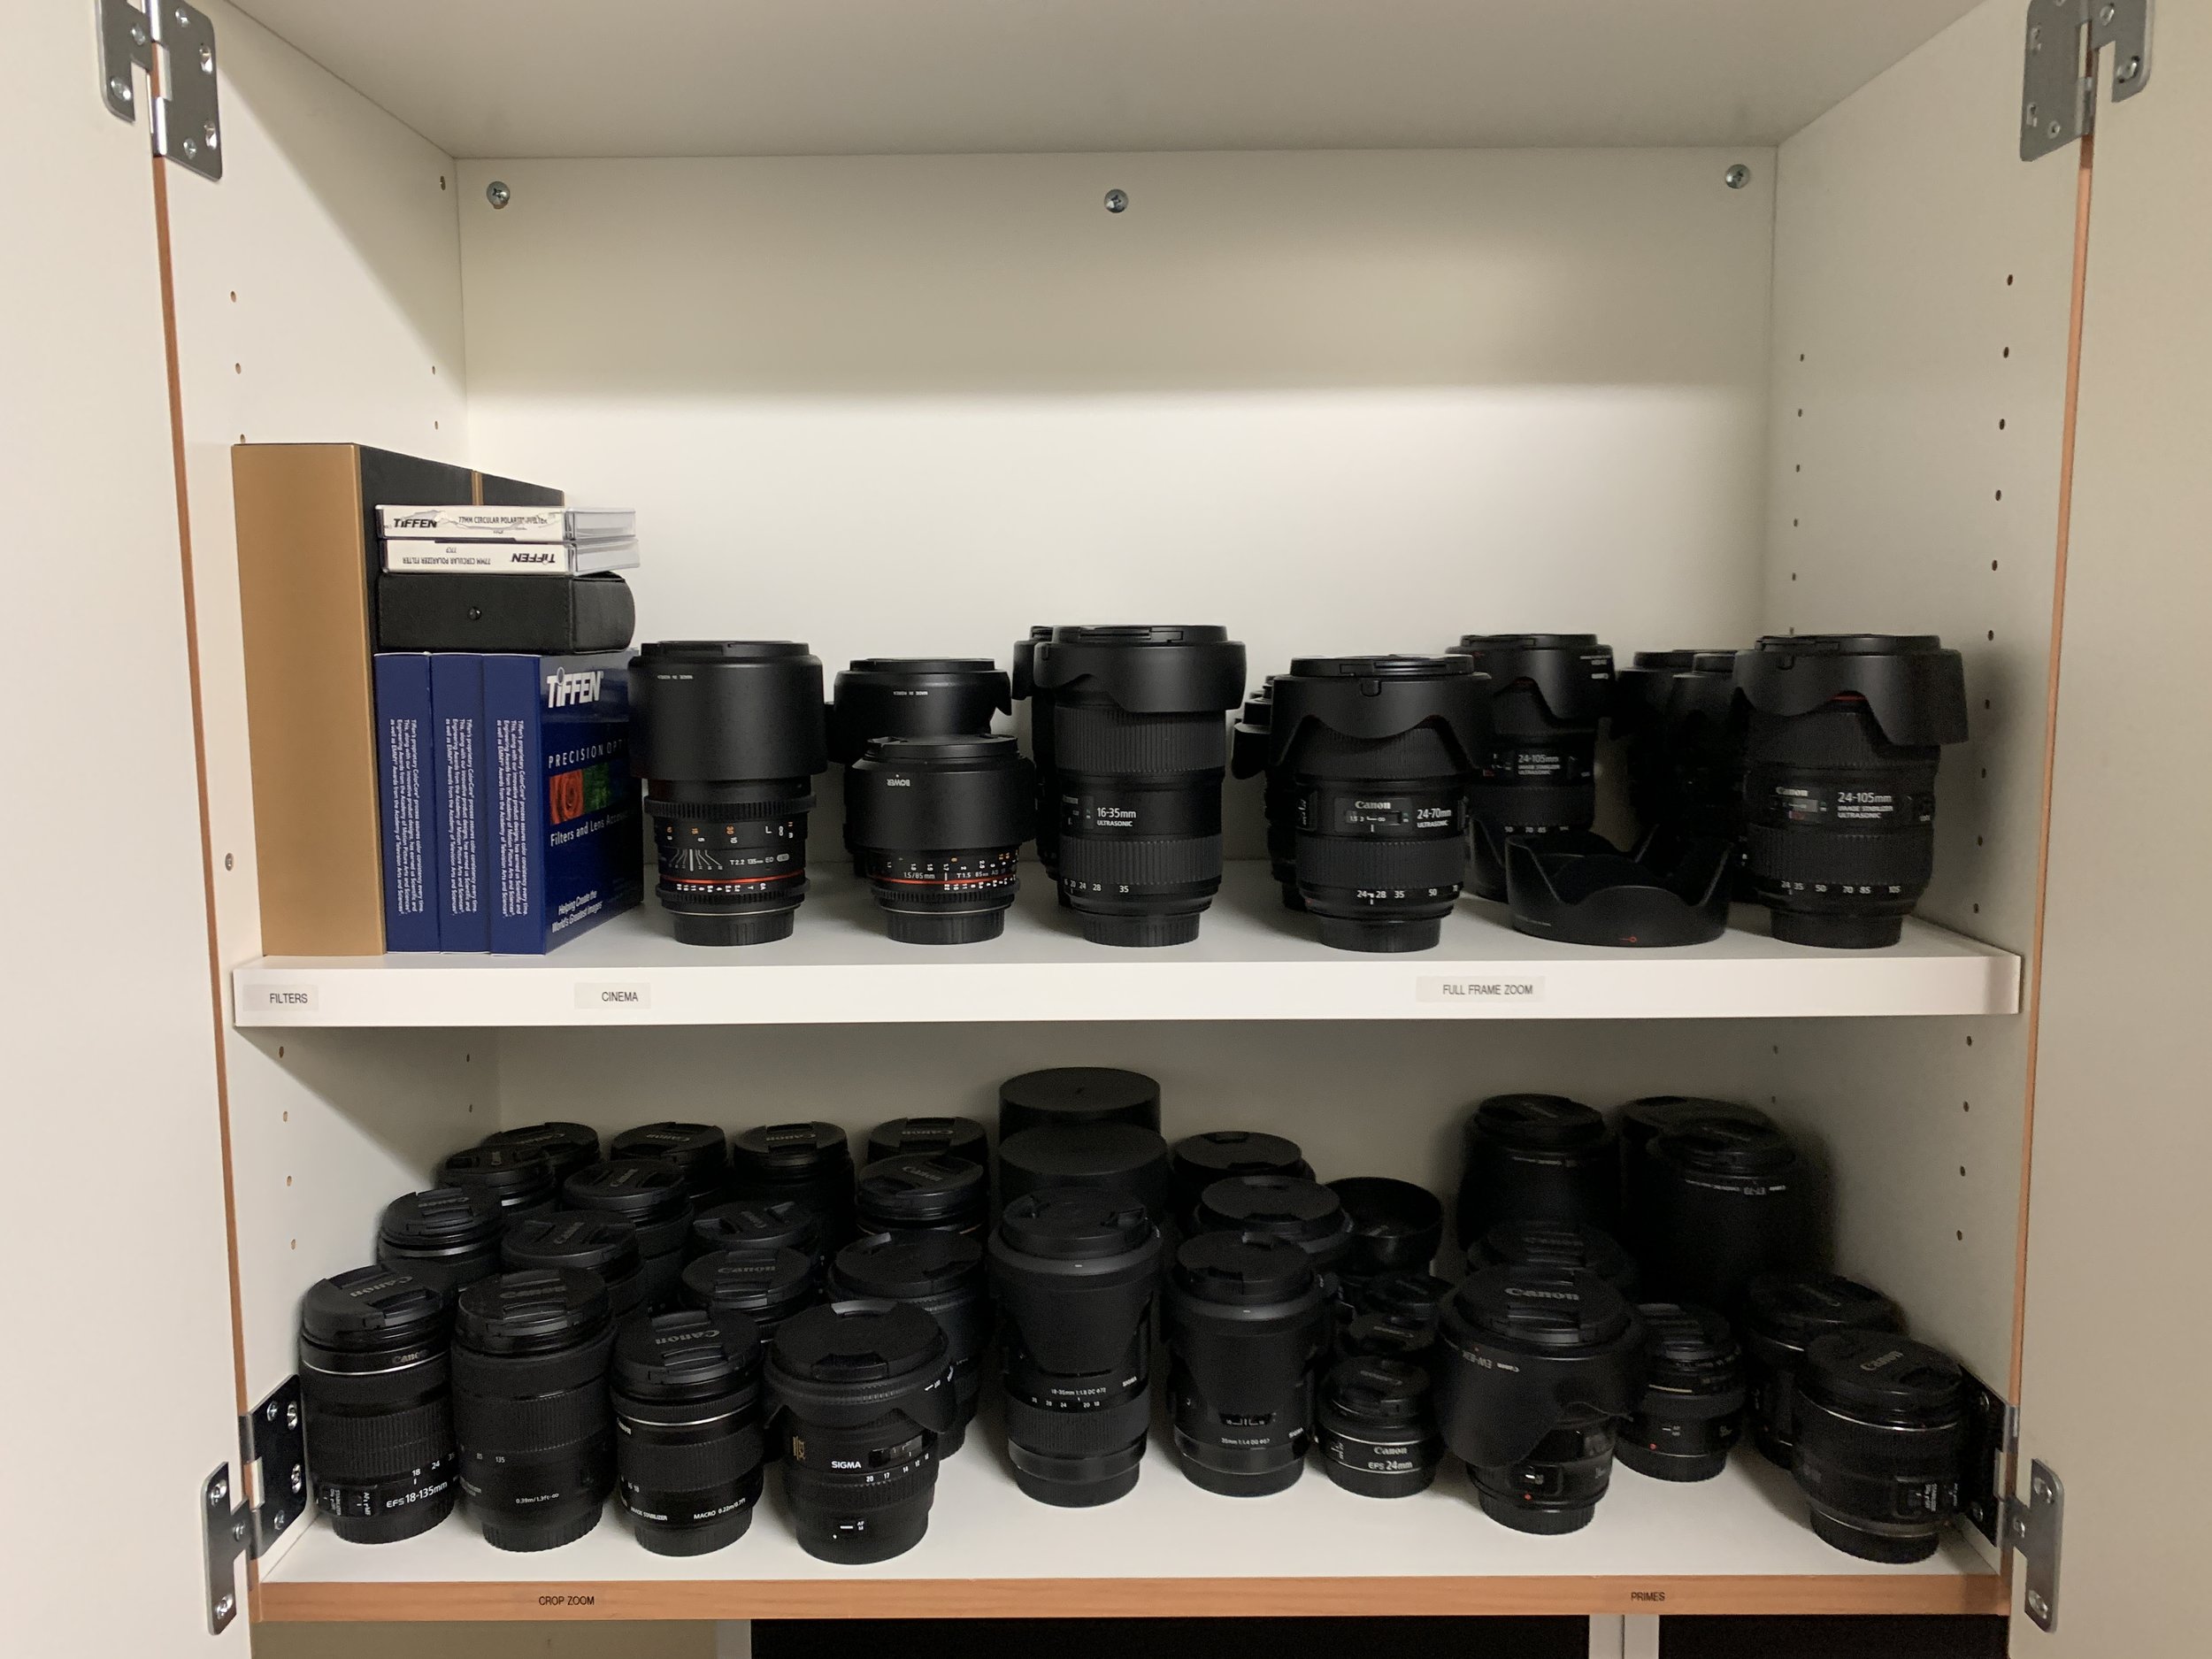  I always loved helping students learn about lenses. Once they got interested in primes and specific style choices, things always got really fun! Pretty wild to have this kind of a selection– and this was only about 1/3 of them! 